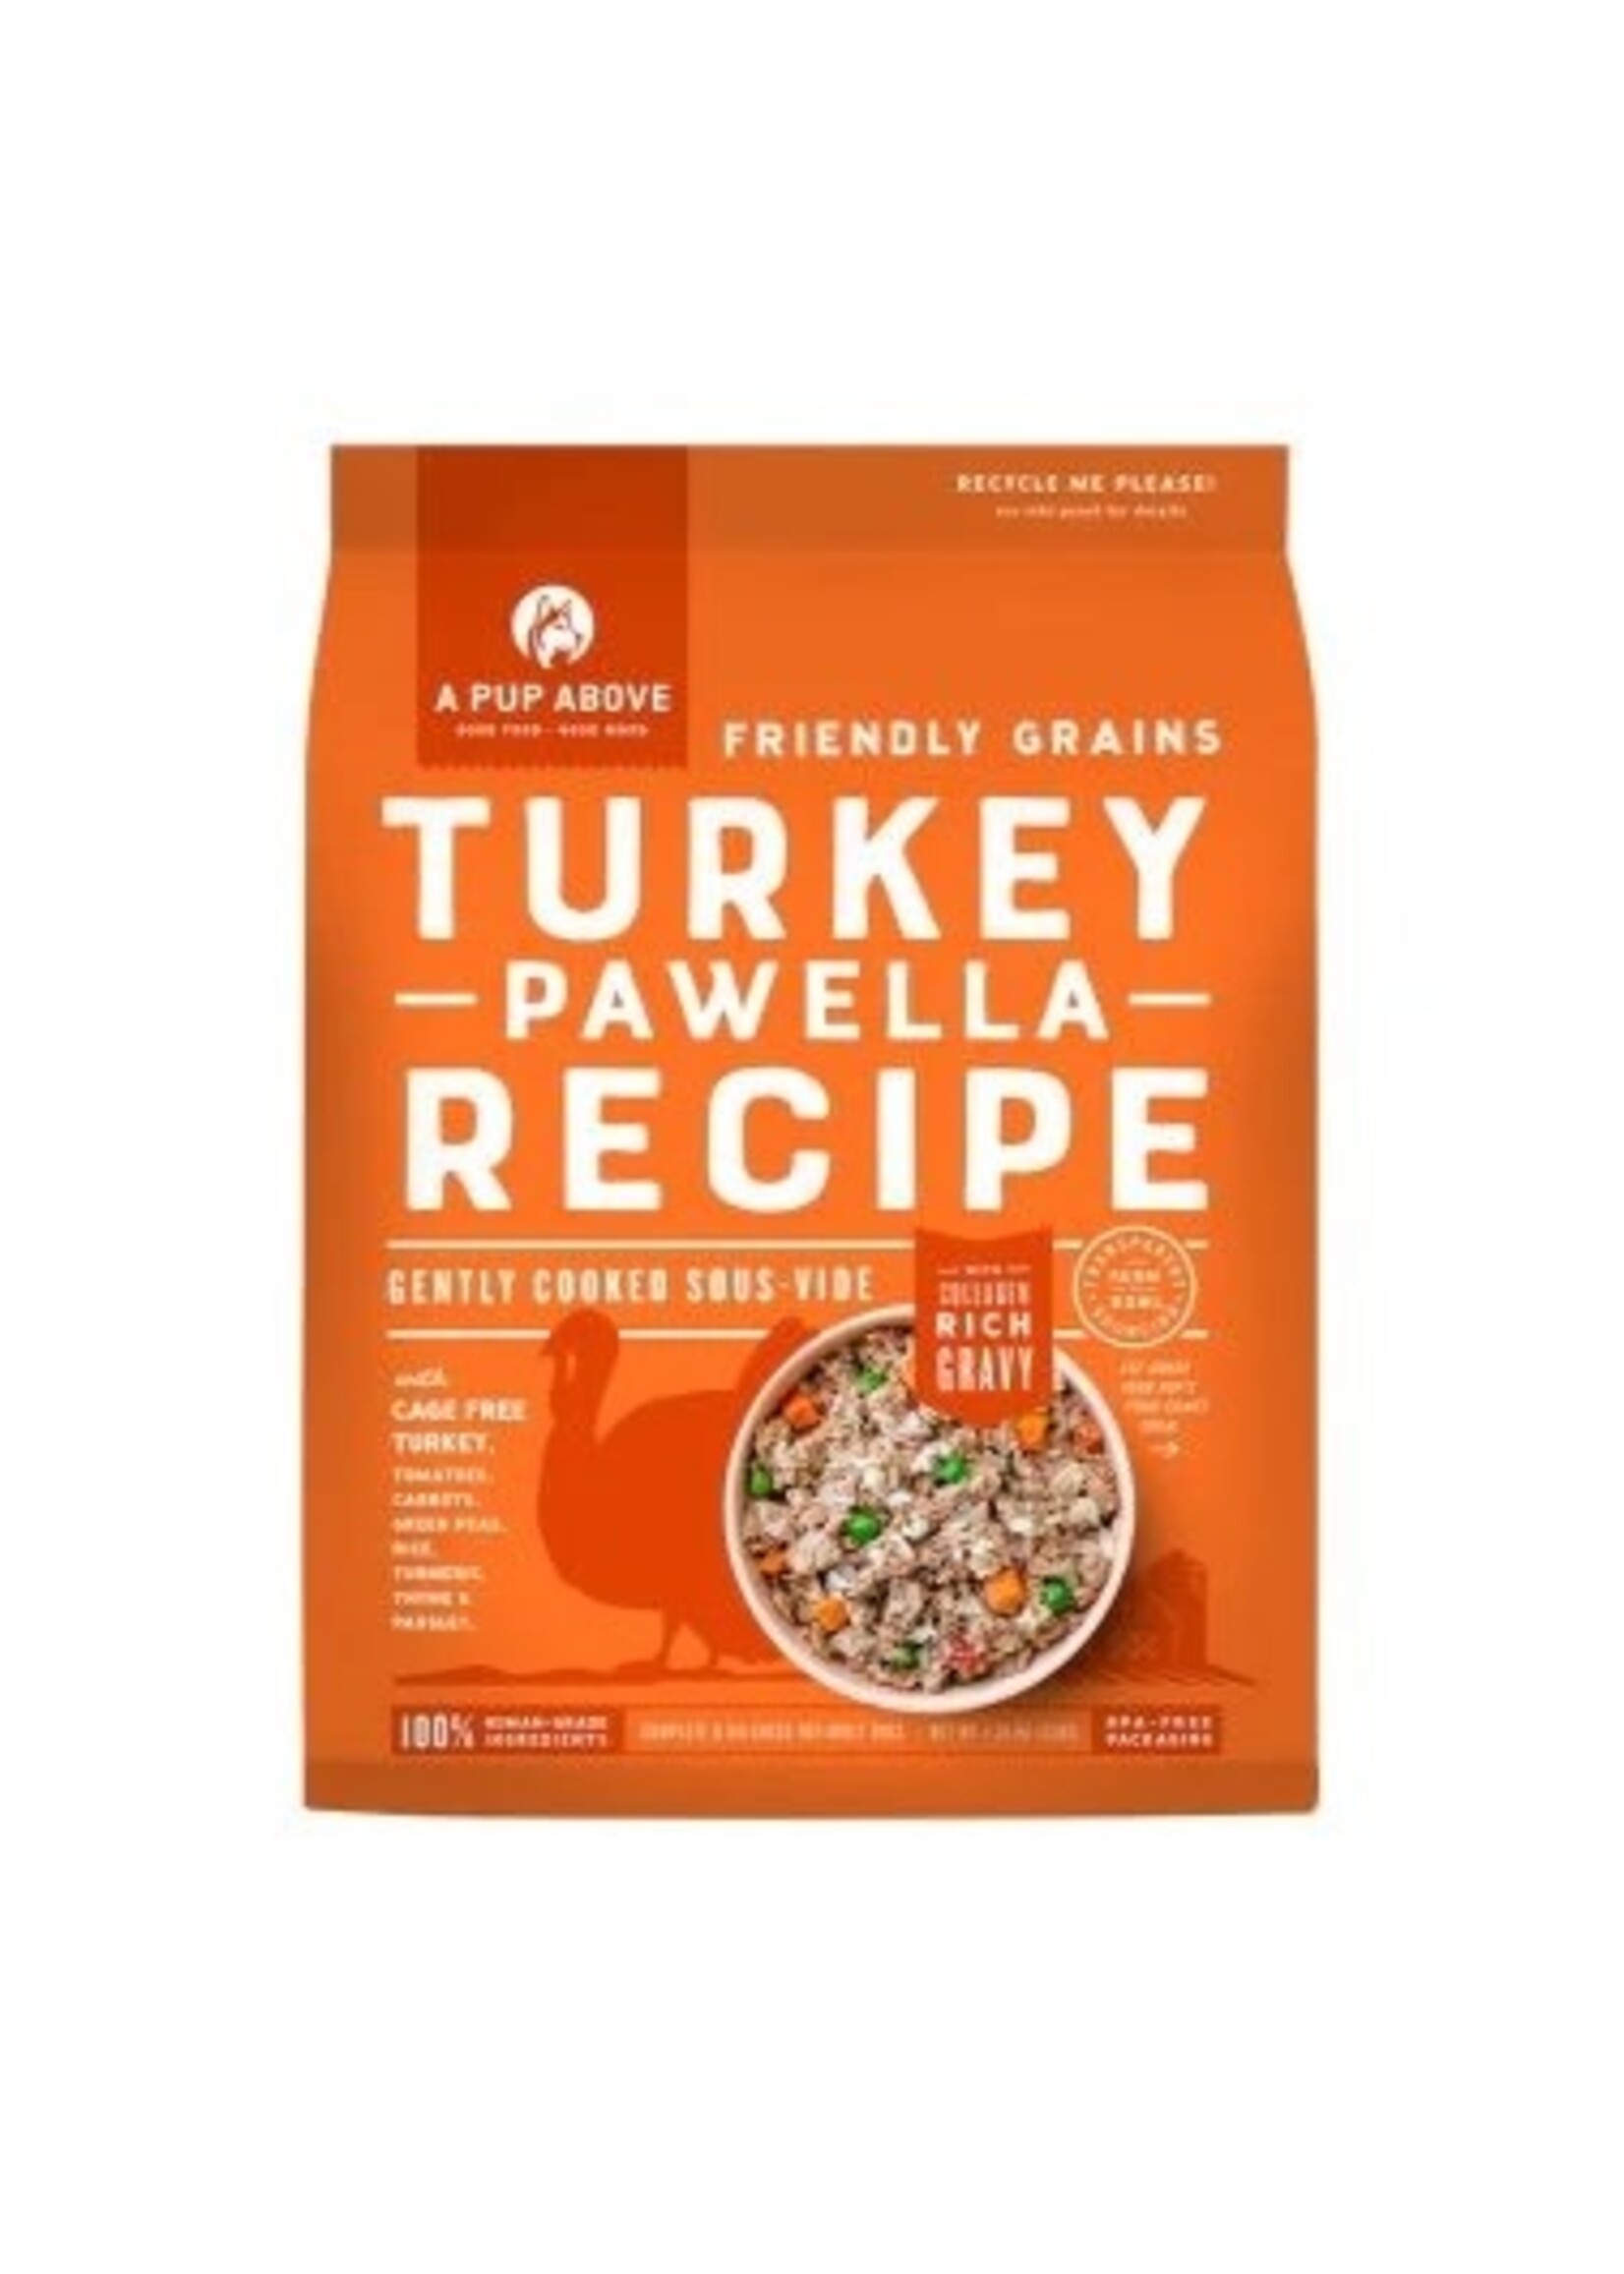 A Pup Above Turkey Pawella Gently Cooked Frozen Dog Food Turkey Recipe 1 lb